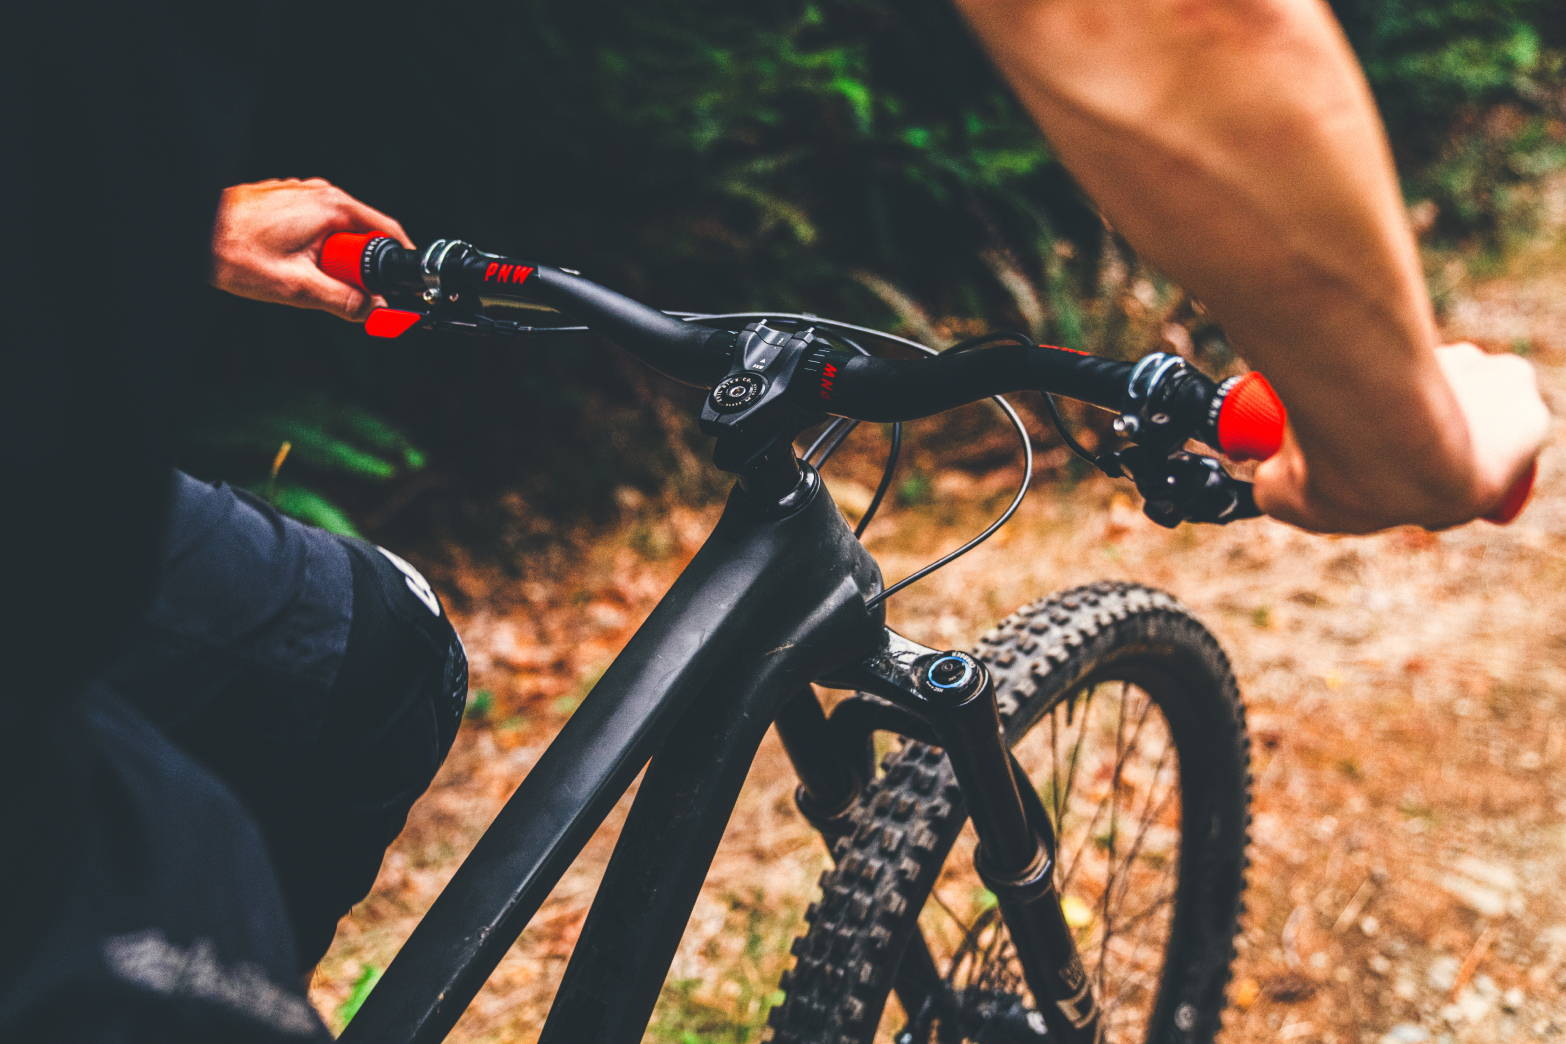 How to find proper MTB handlebar width with PNW Components. 